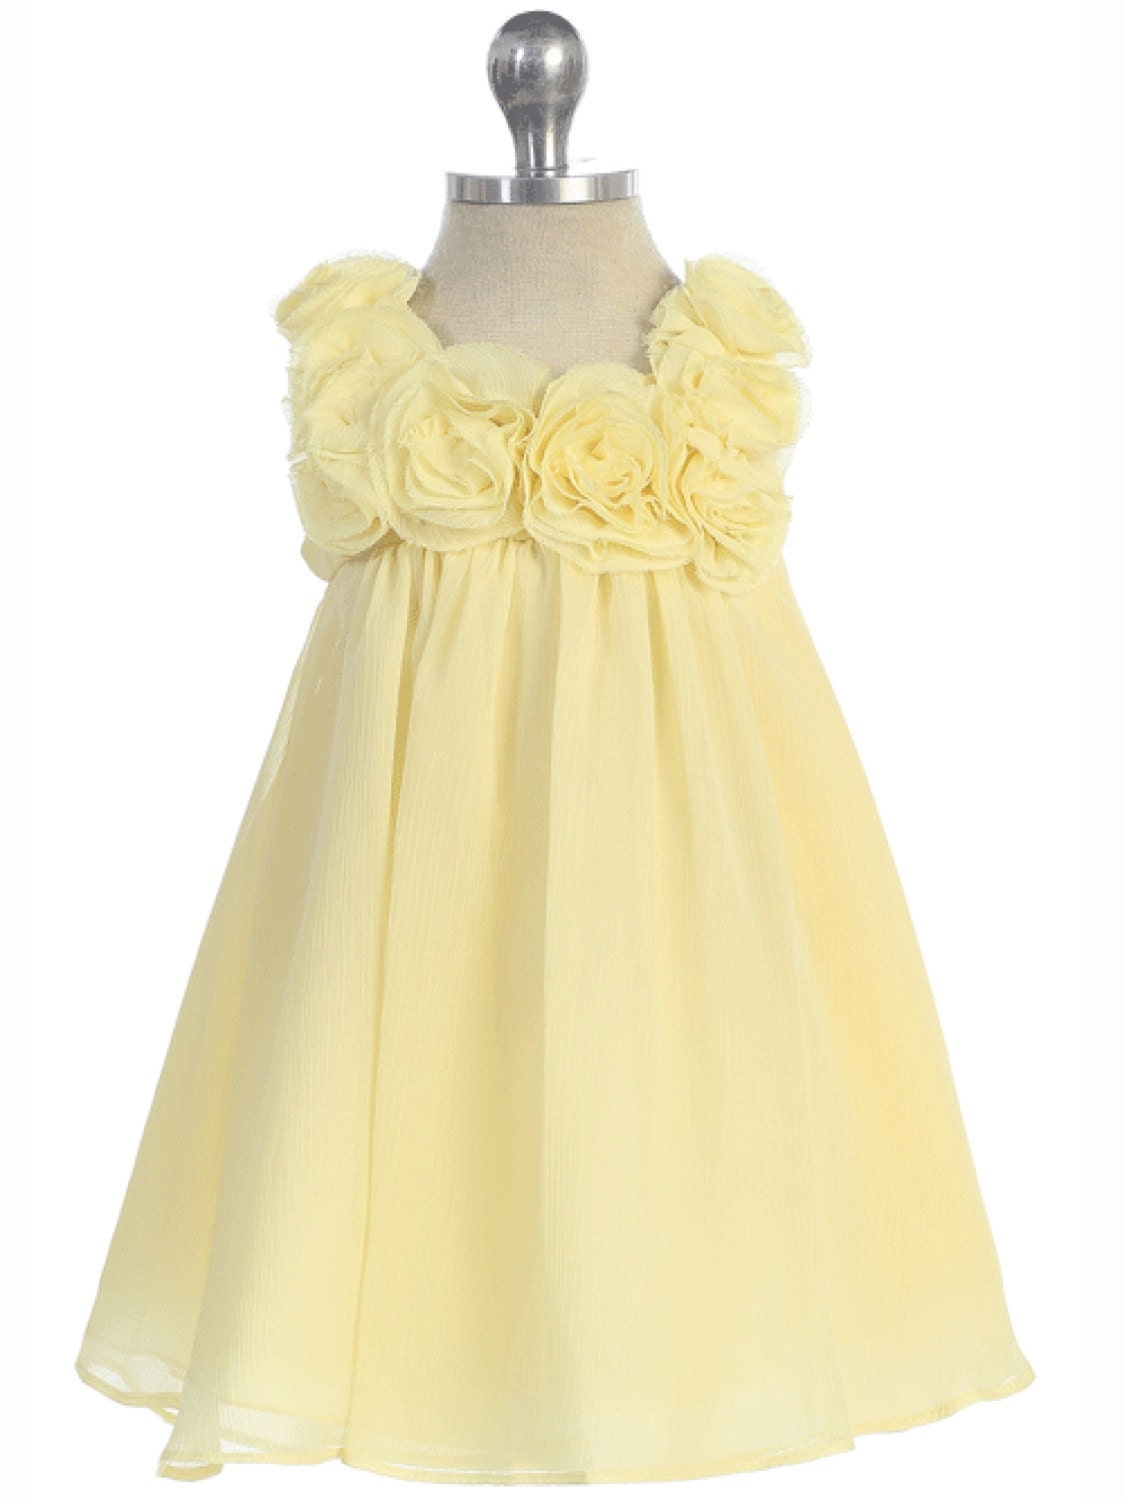 Chiffon Knee length Dress with Hand-rolled by KidsDreamDresses